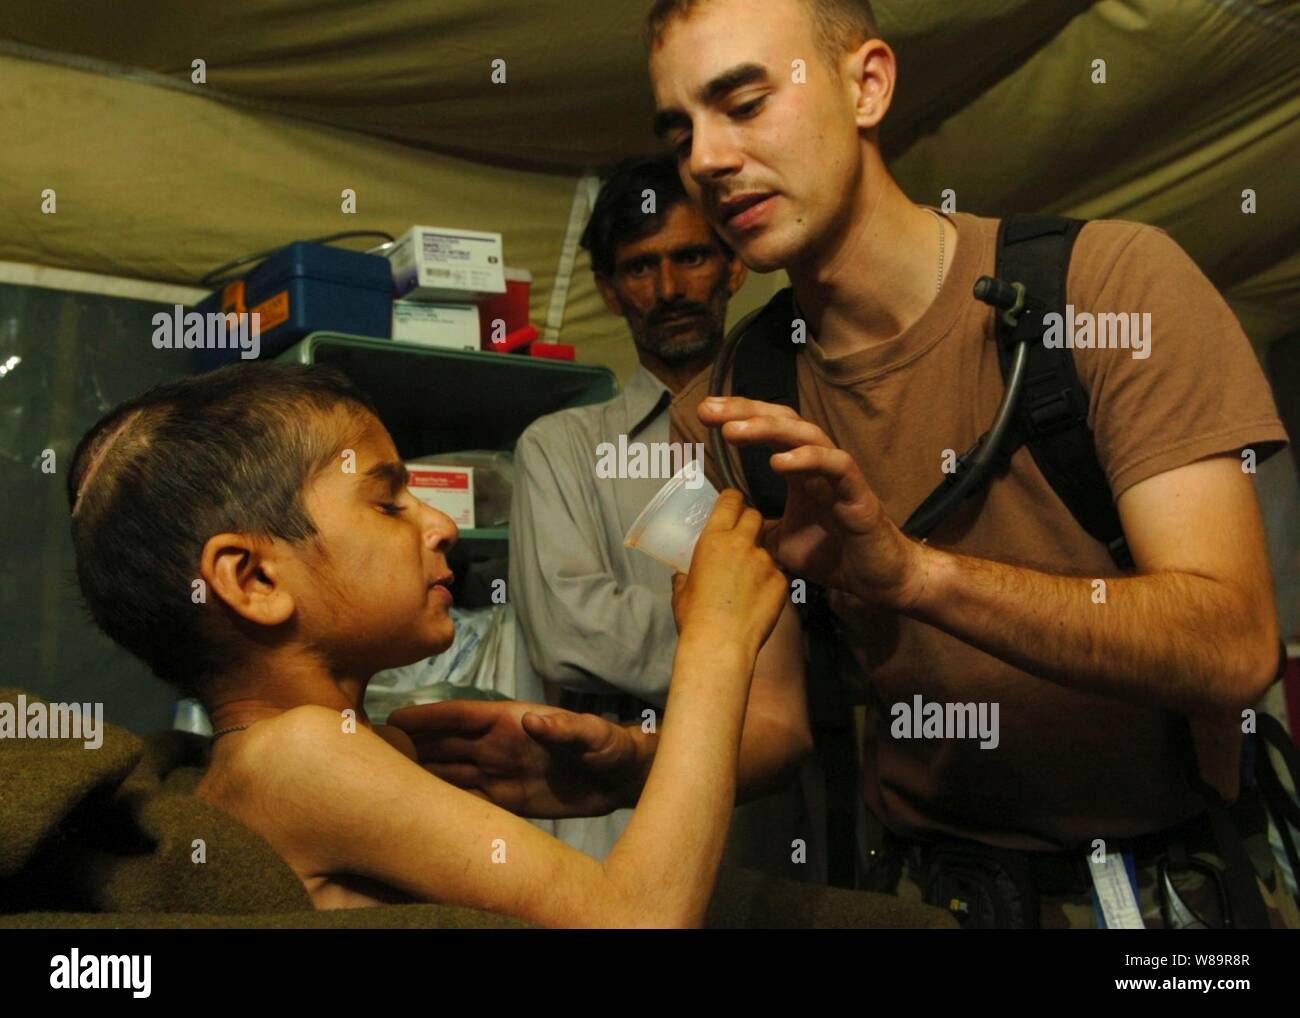 U.S. Army 1st Lt. Tory Marcon helps Riaz Sharif drink a powdered milkshake from a Meal, Ready to Eat, in Muzaffarabad, Pakistan, on Nov. 1, 2005.  The milkshake is the only food tetanus patients at the 212th Mobile Army Surgical Hospital can manage to swallow because of muscle spasms.  The Department of Defense is supporting the State Department by providing disaster relief supplies and services following the massive earthquake that struck Pakistan and parts of India and Afghanistan. Stock Photo